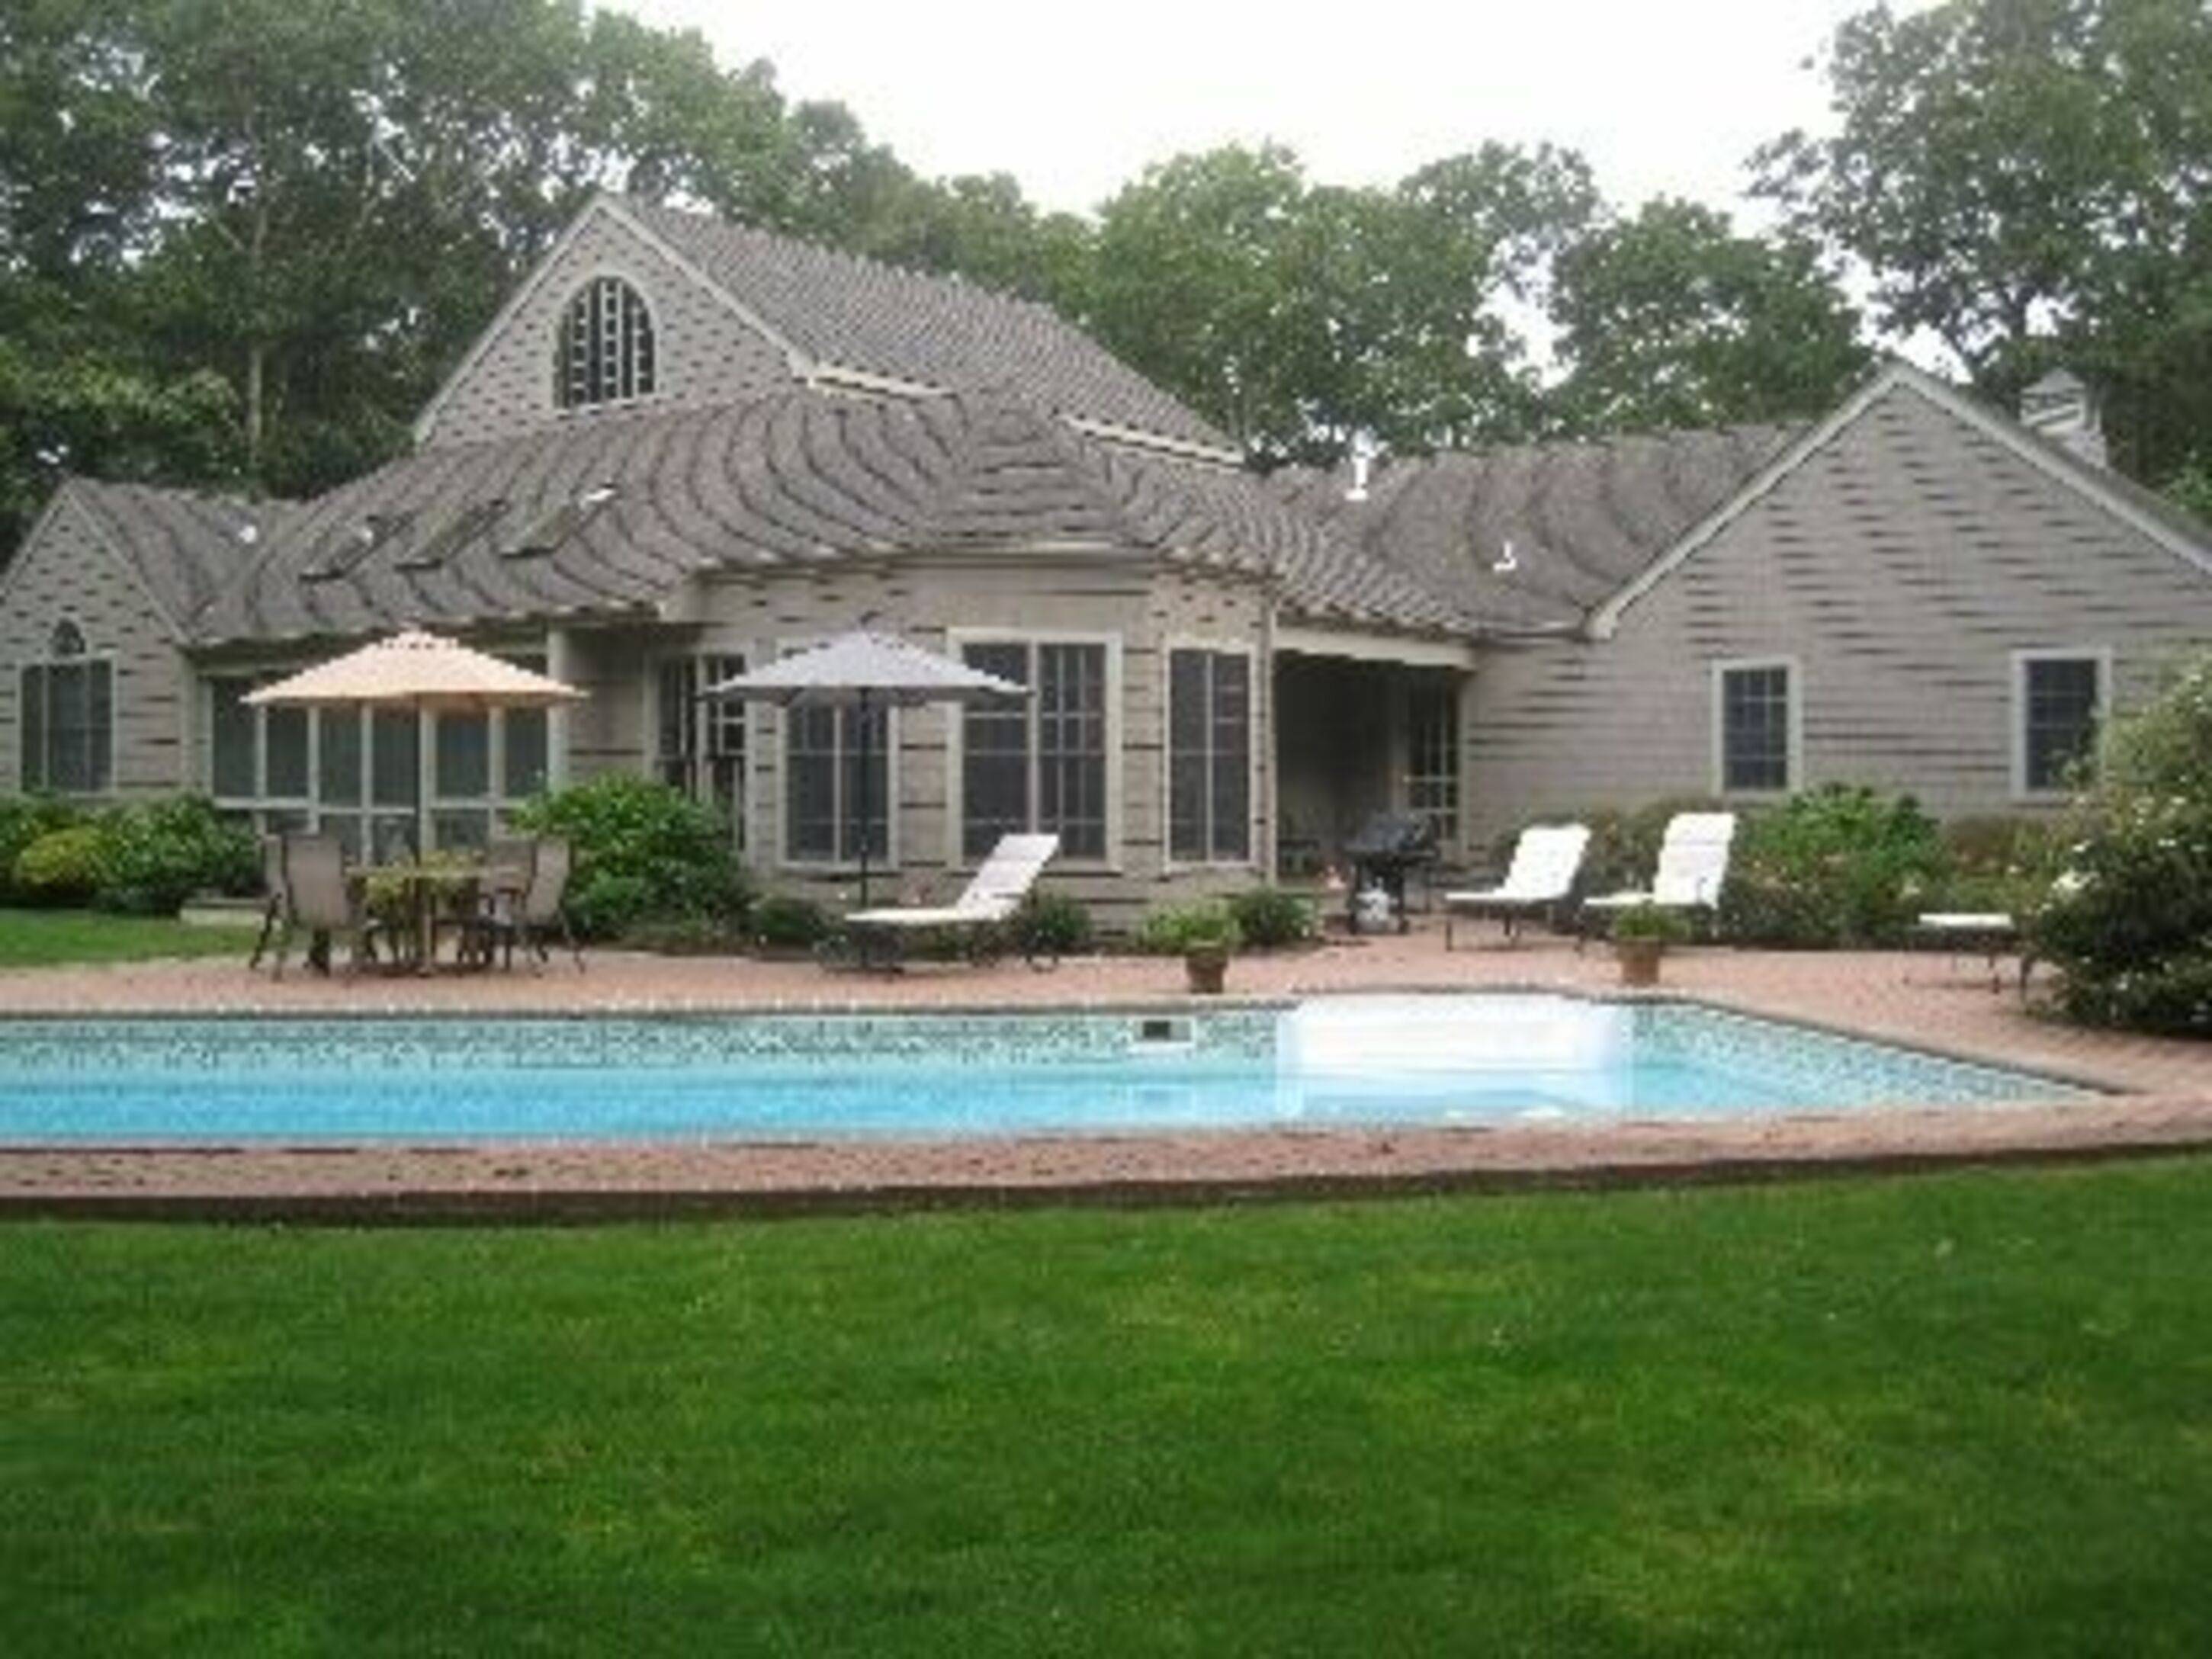 Don't Be Fooled, This Is an Amagansett Luxury.